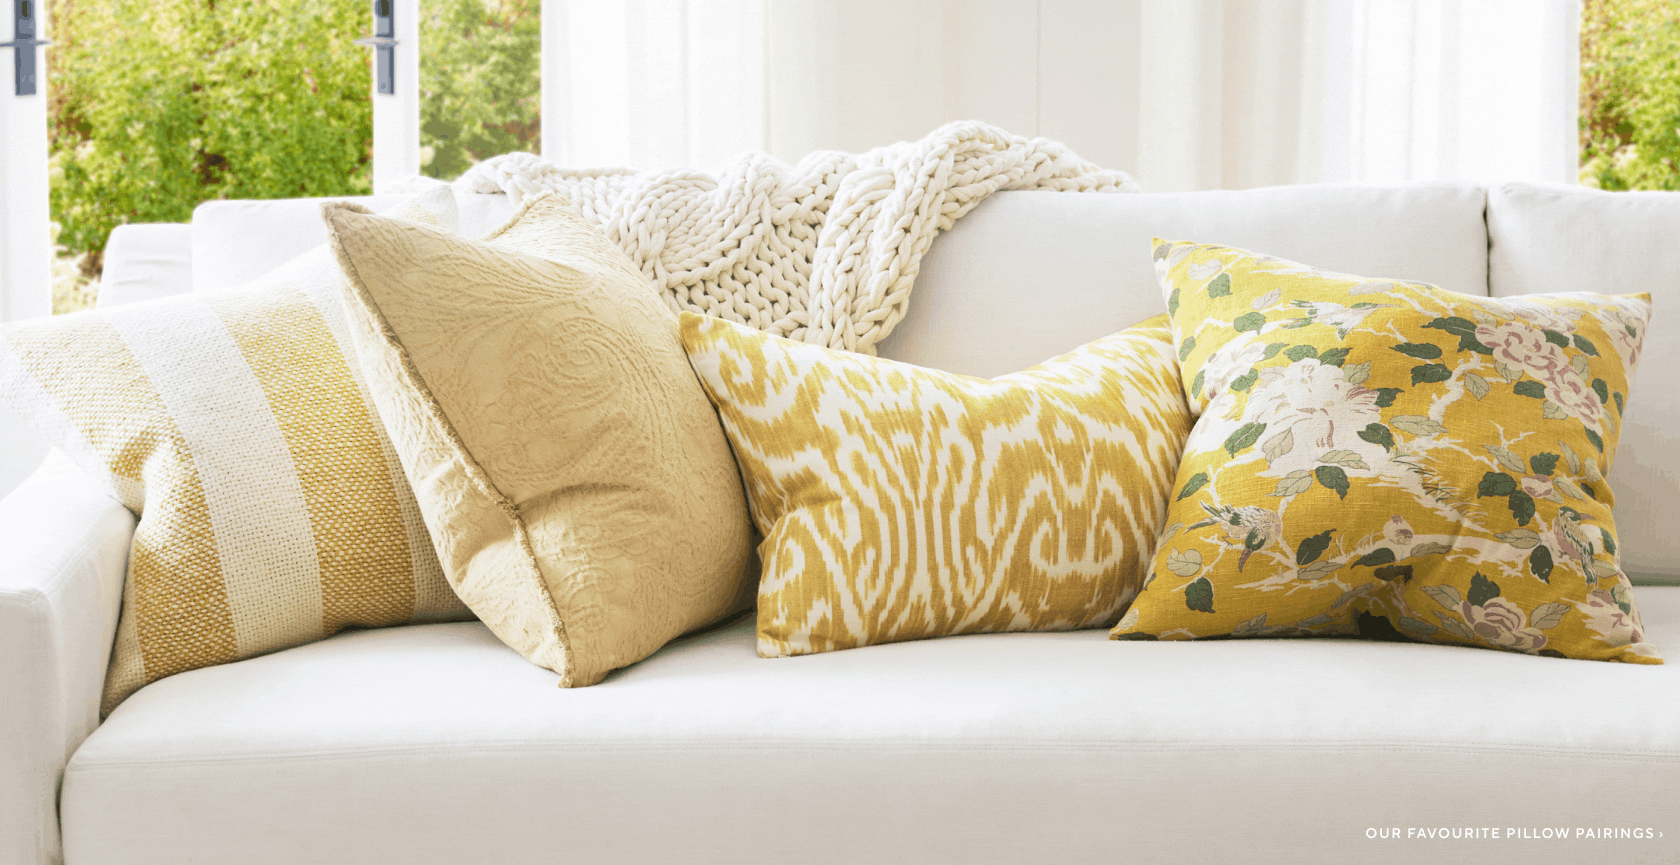 Our Favourite Pillow Pairings